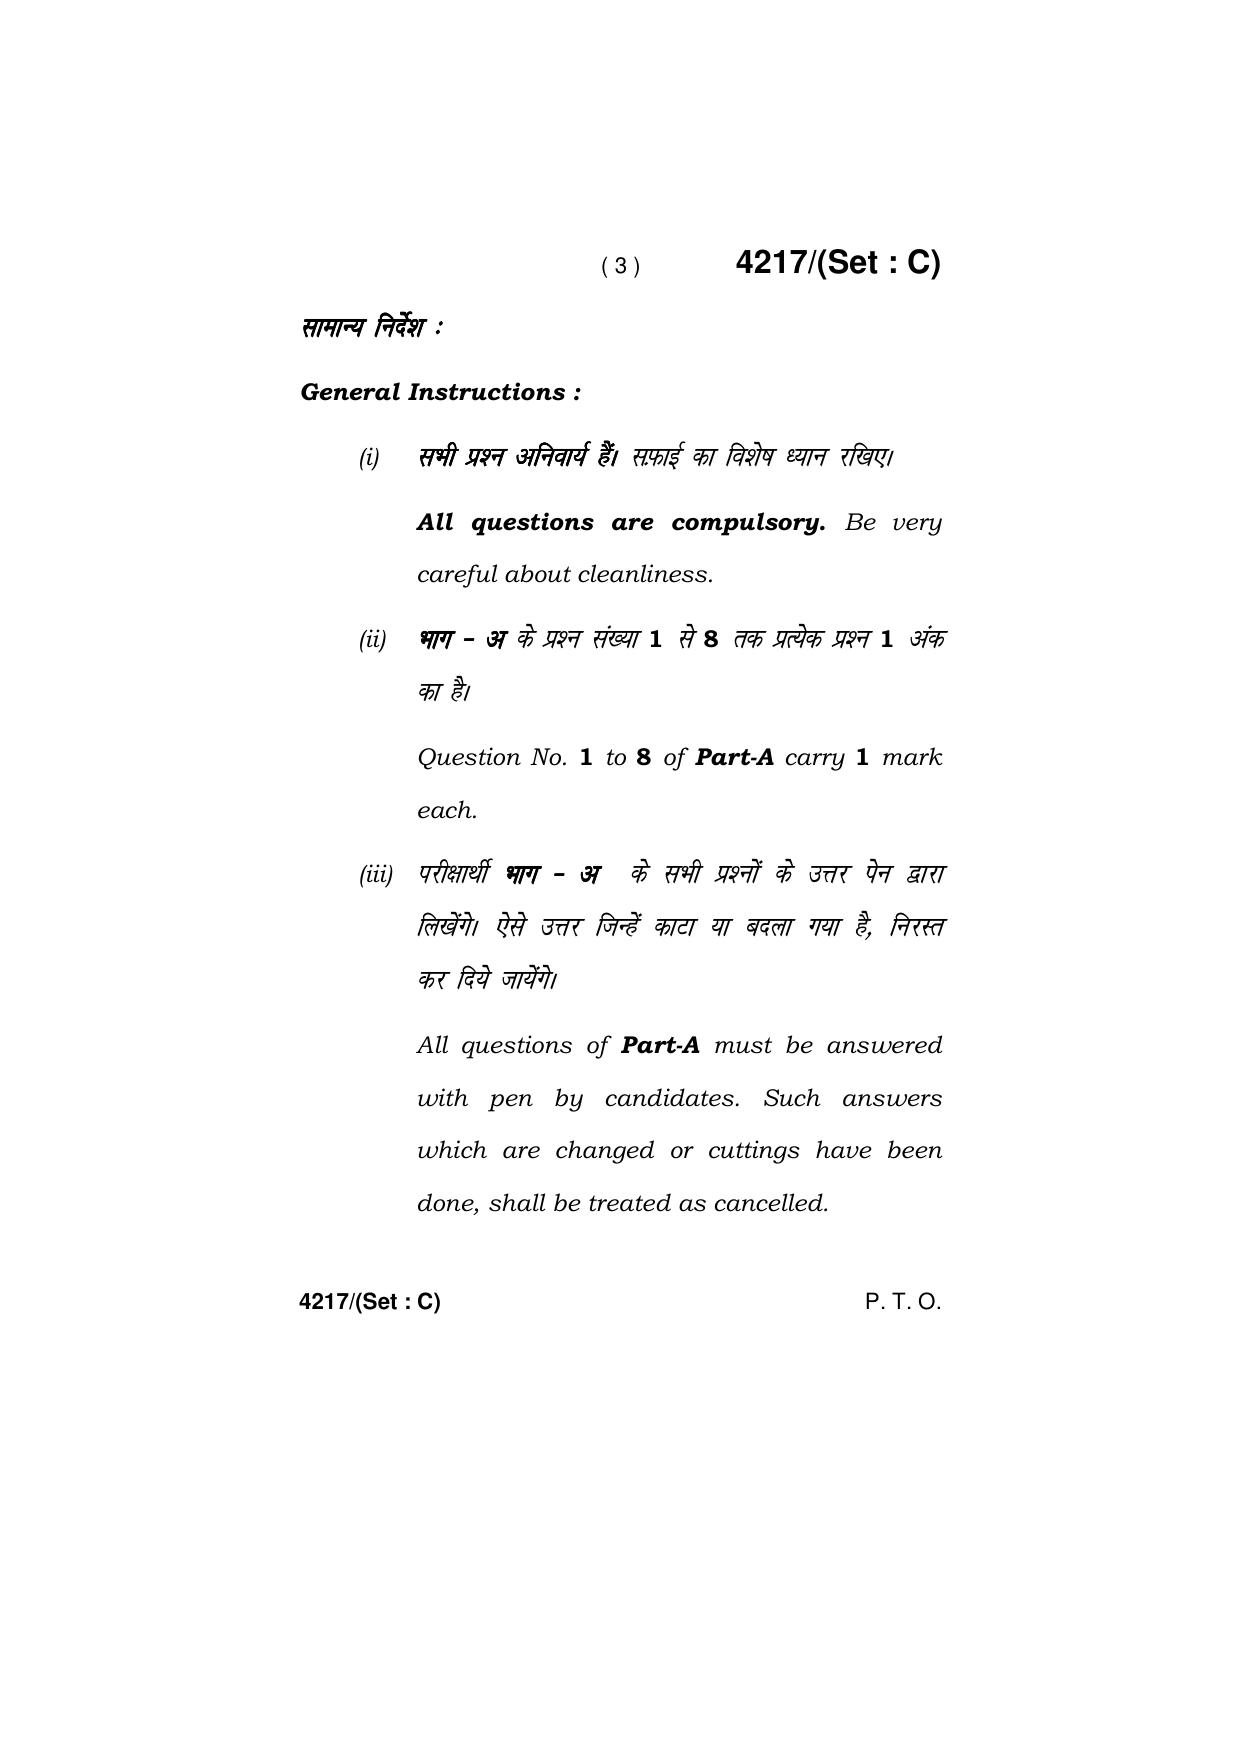 Haryana Board HBSE Class 10 Drawing (All Set) 2019 Question Paper - Page 19